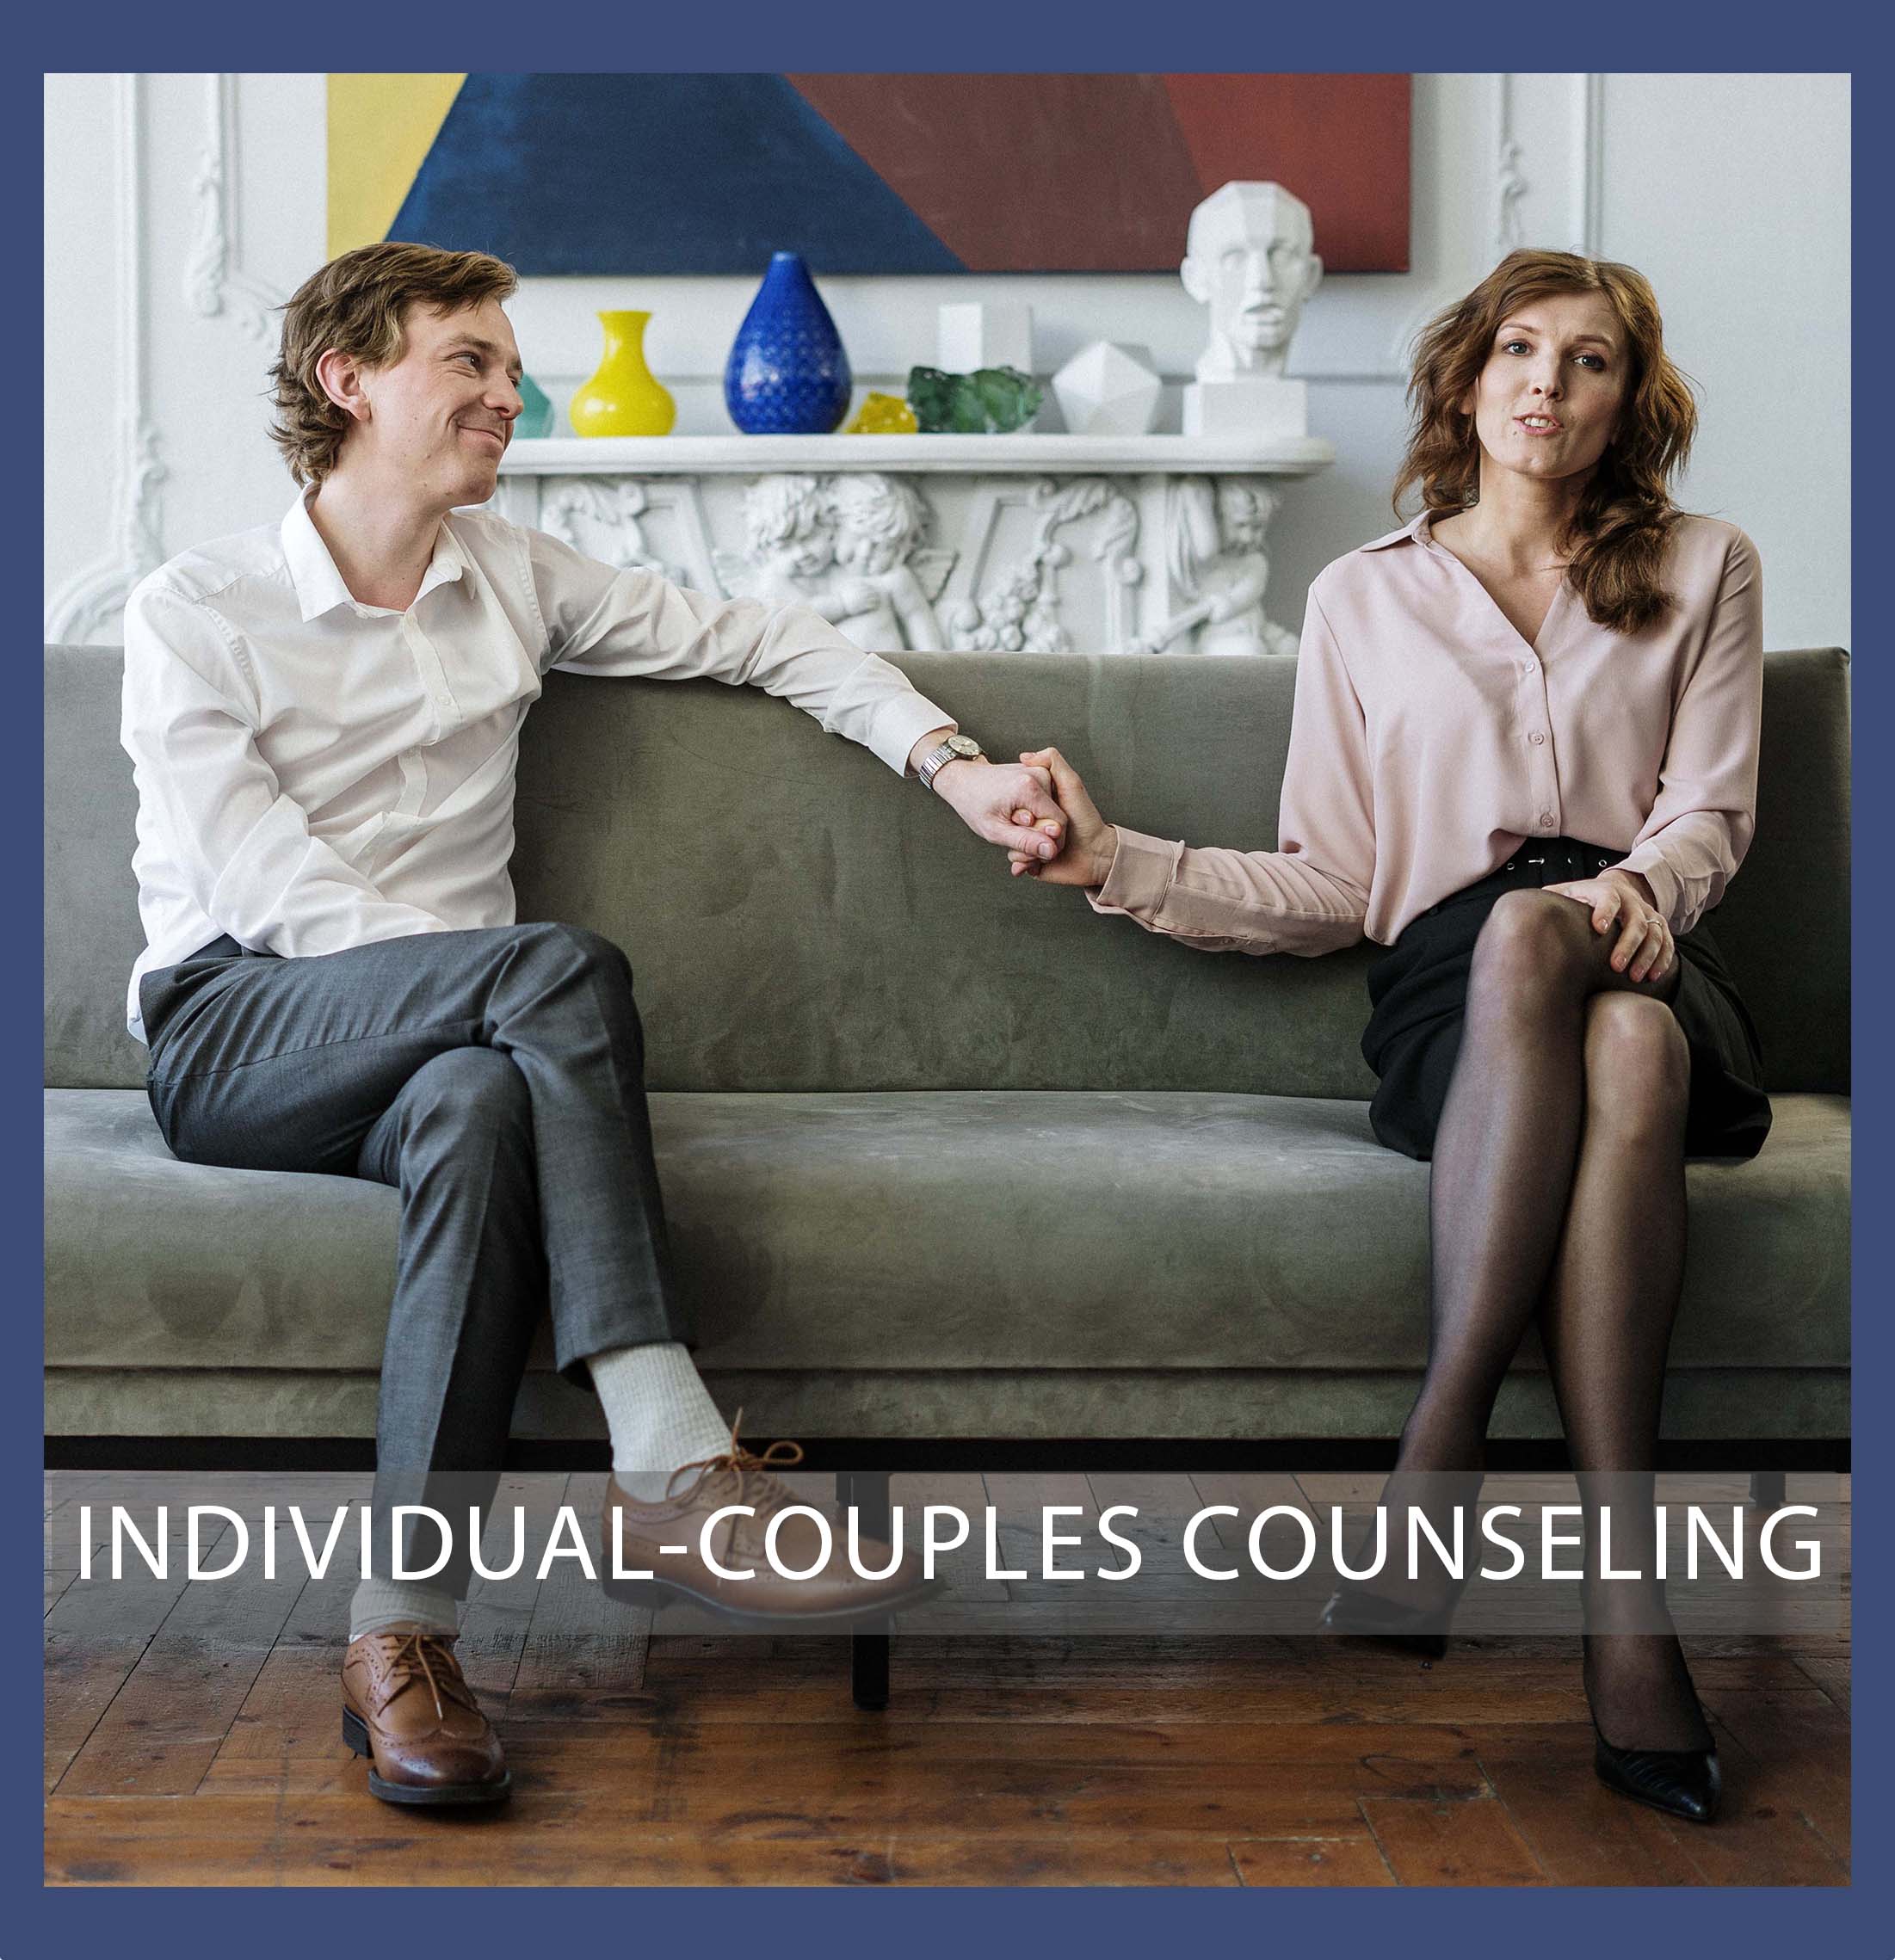 Individuals-Couples Counseling